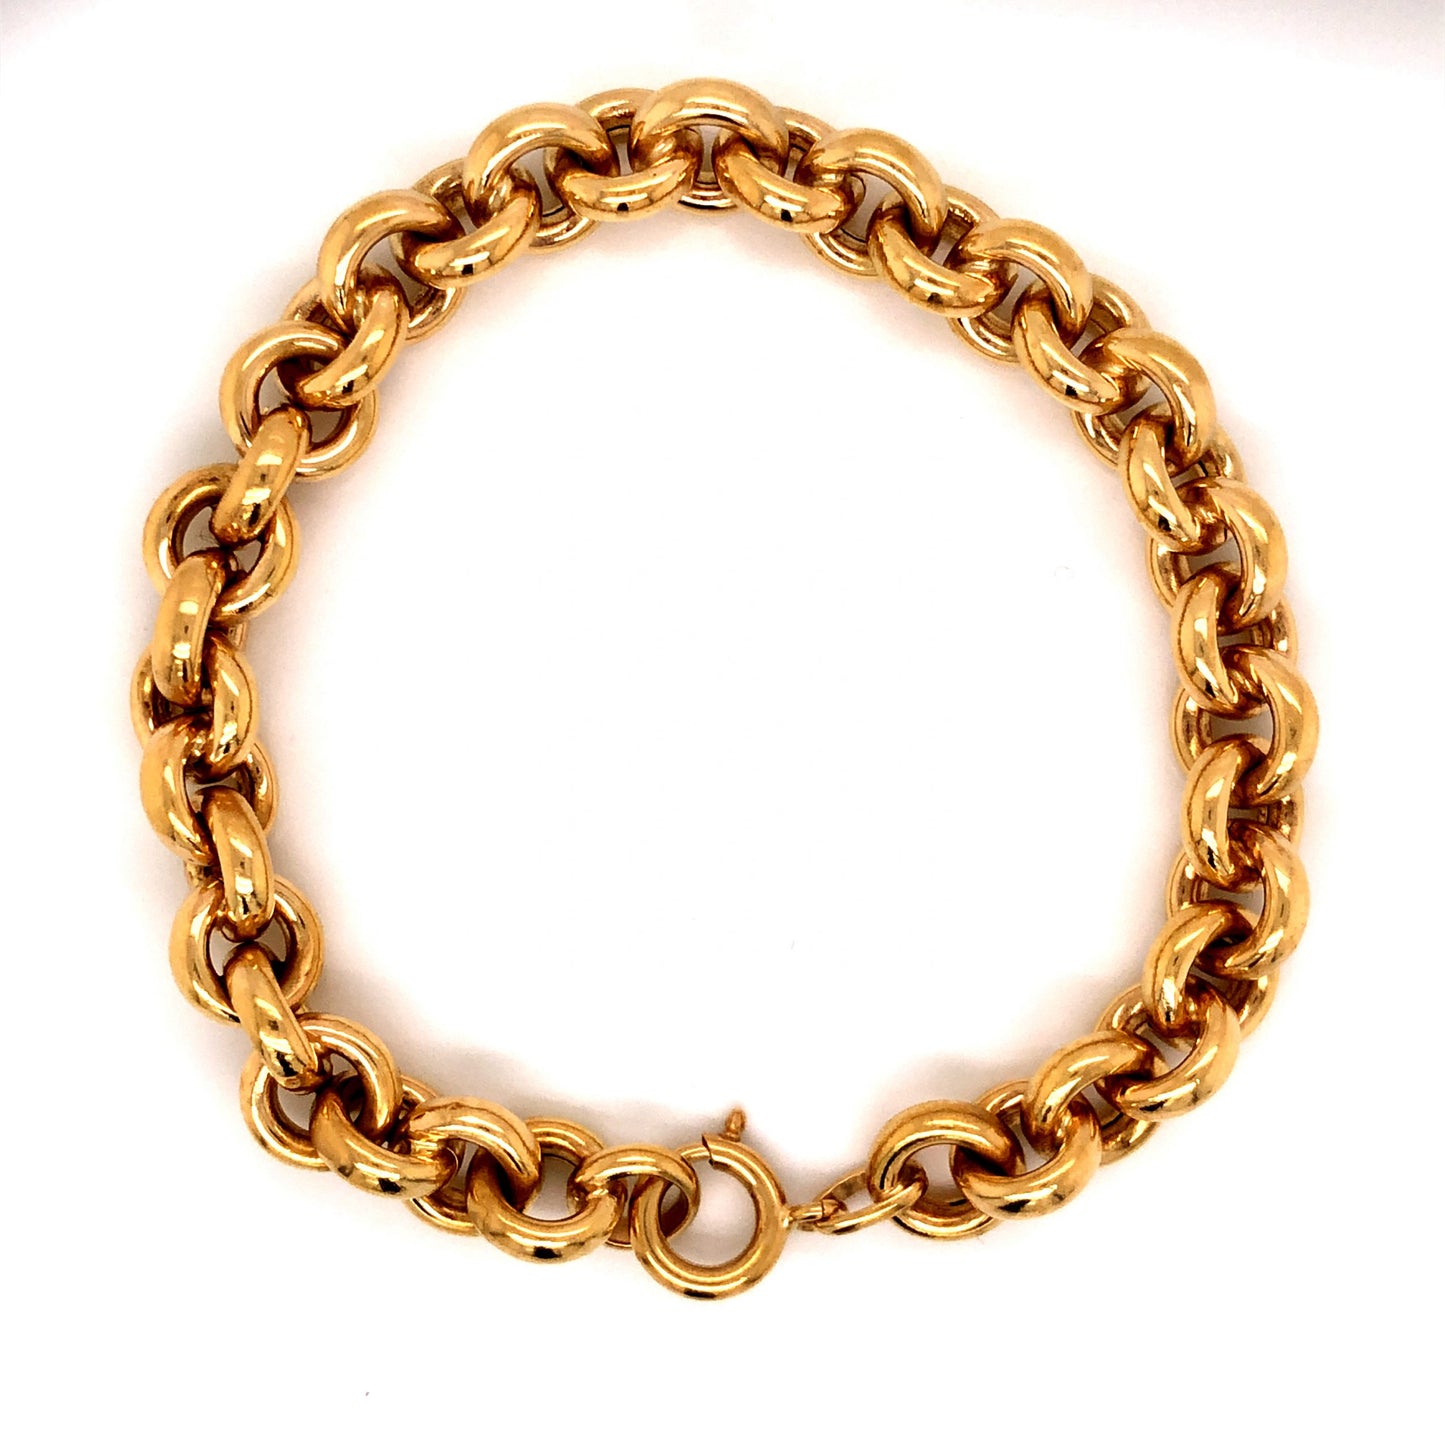 Gold Chain Link Bracelet in 18k Yellow Gold